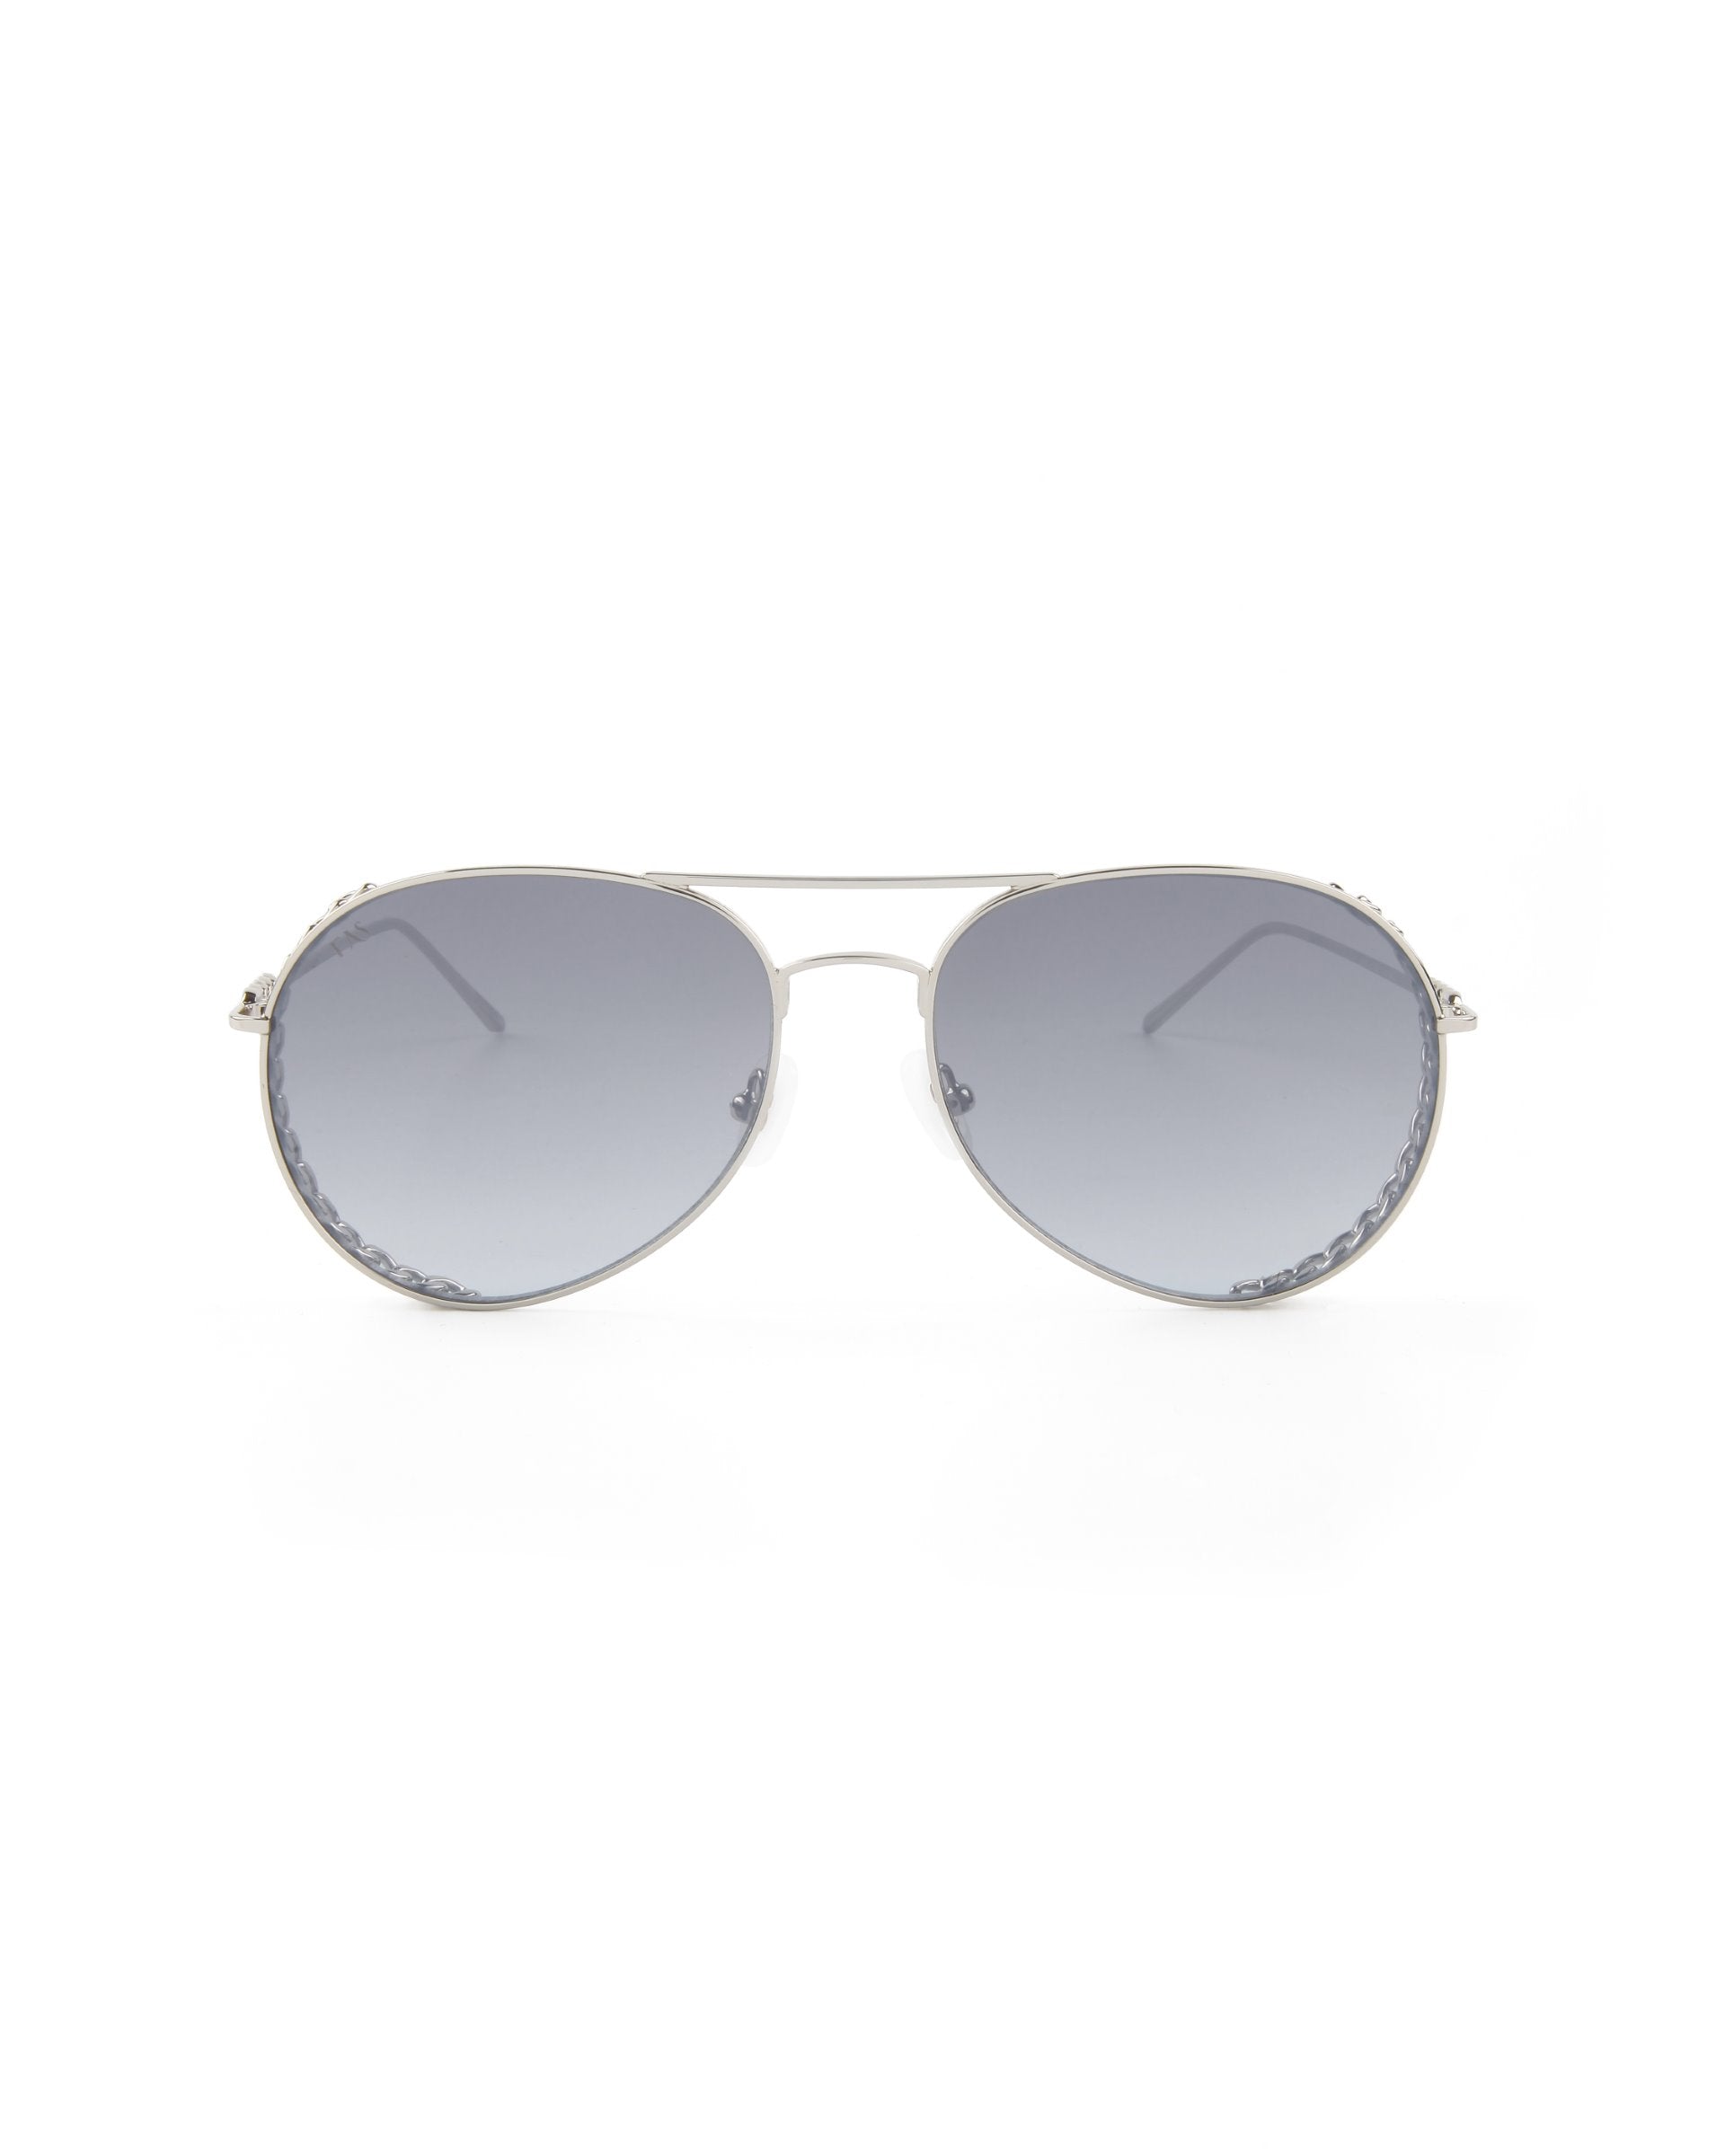 A pair of gold plated stainless steel aviator sunglasses with dark gradient nylon lenses. The Links by For Art's Sake® have thin metal frames and nose pads, giving them a classic, sleek appearance.